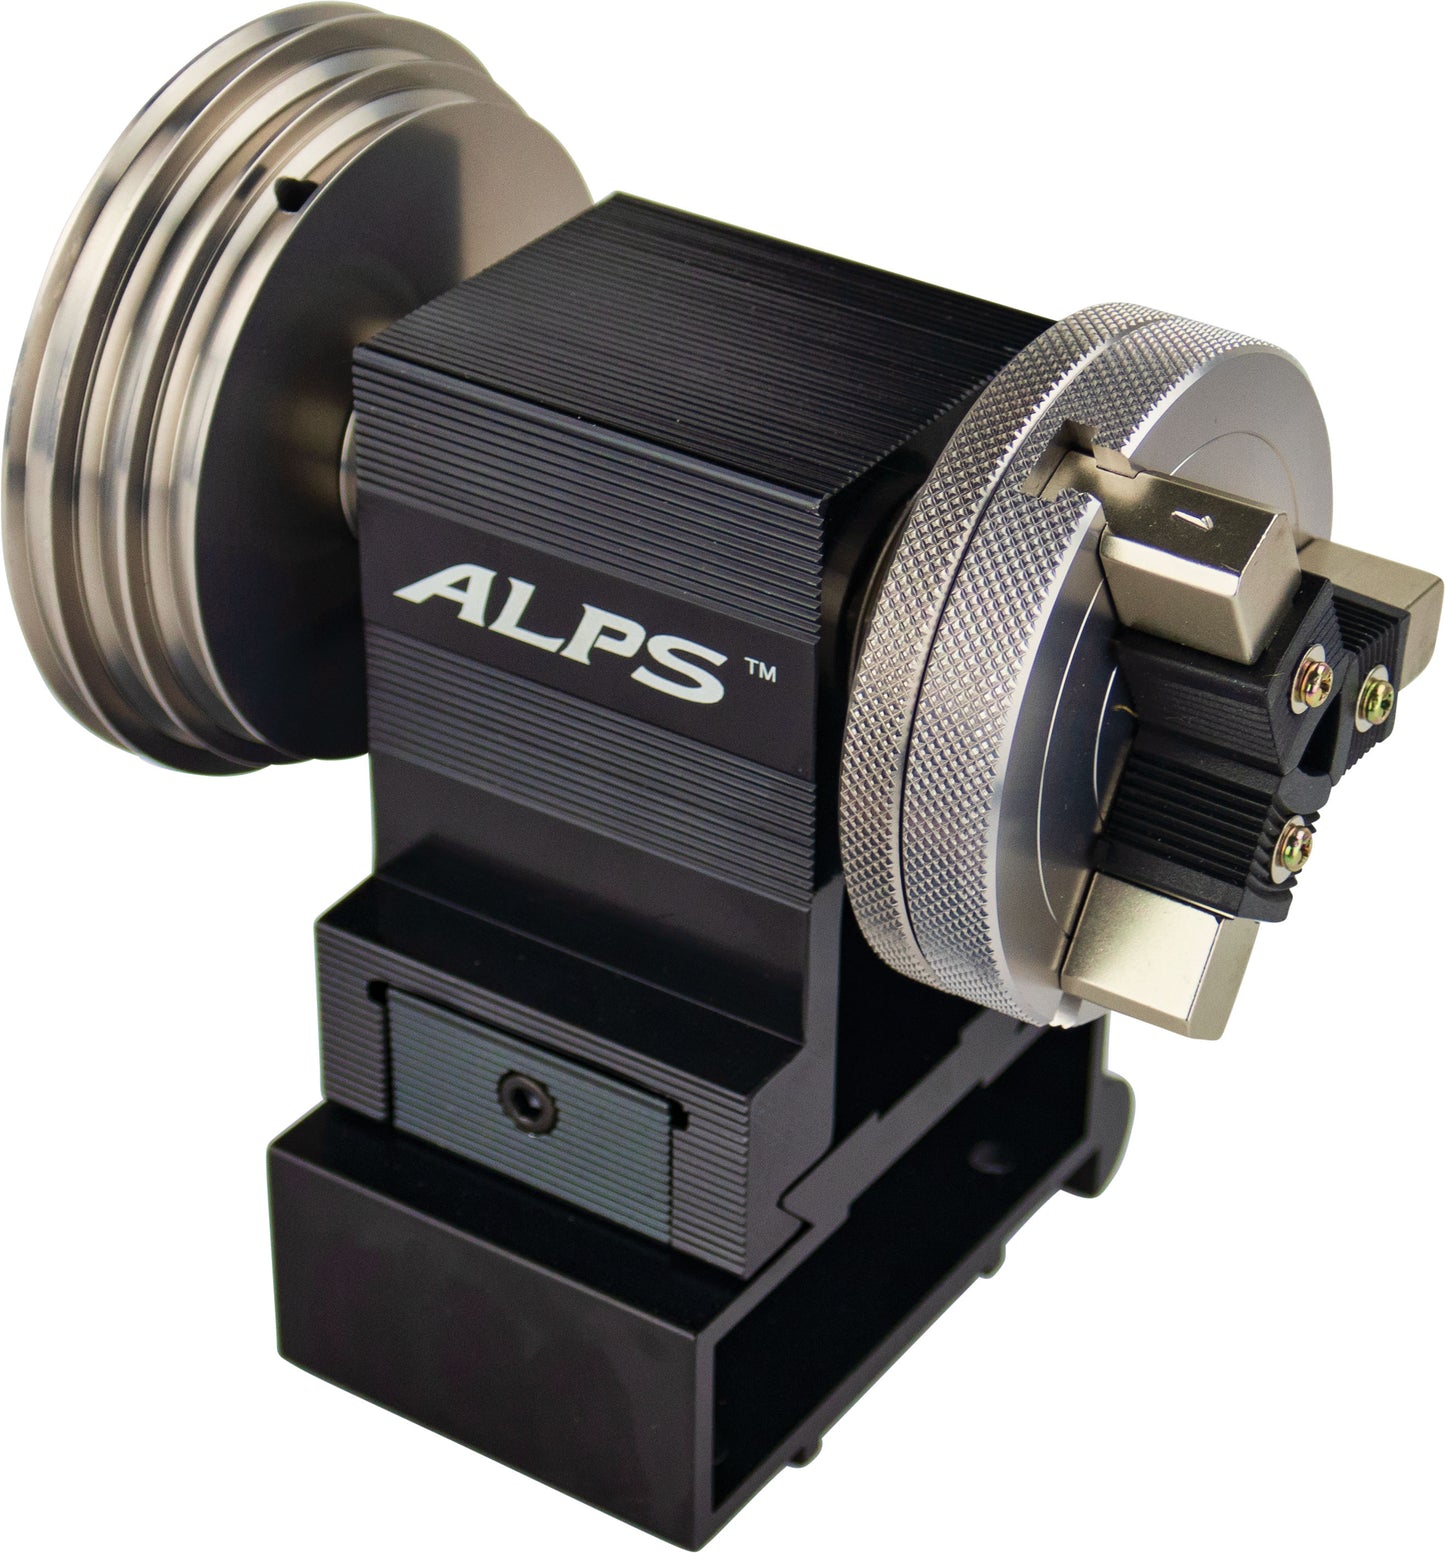 ALPS upgraded metal lathe chuck is the finest chuck system available on the rod building market. By adding the upgraded chuck to either your existing ForeCast wrap machine or any other similar style wrap machine, the ALPS upgraded chuck will instantly give greater advantages.